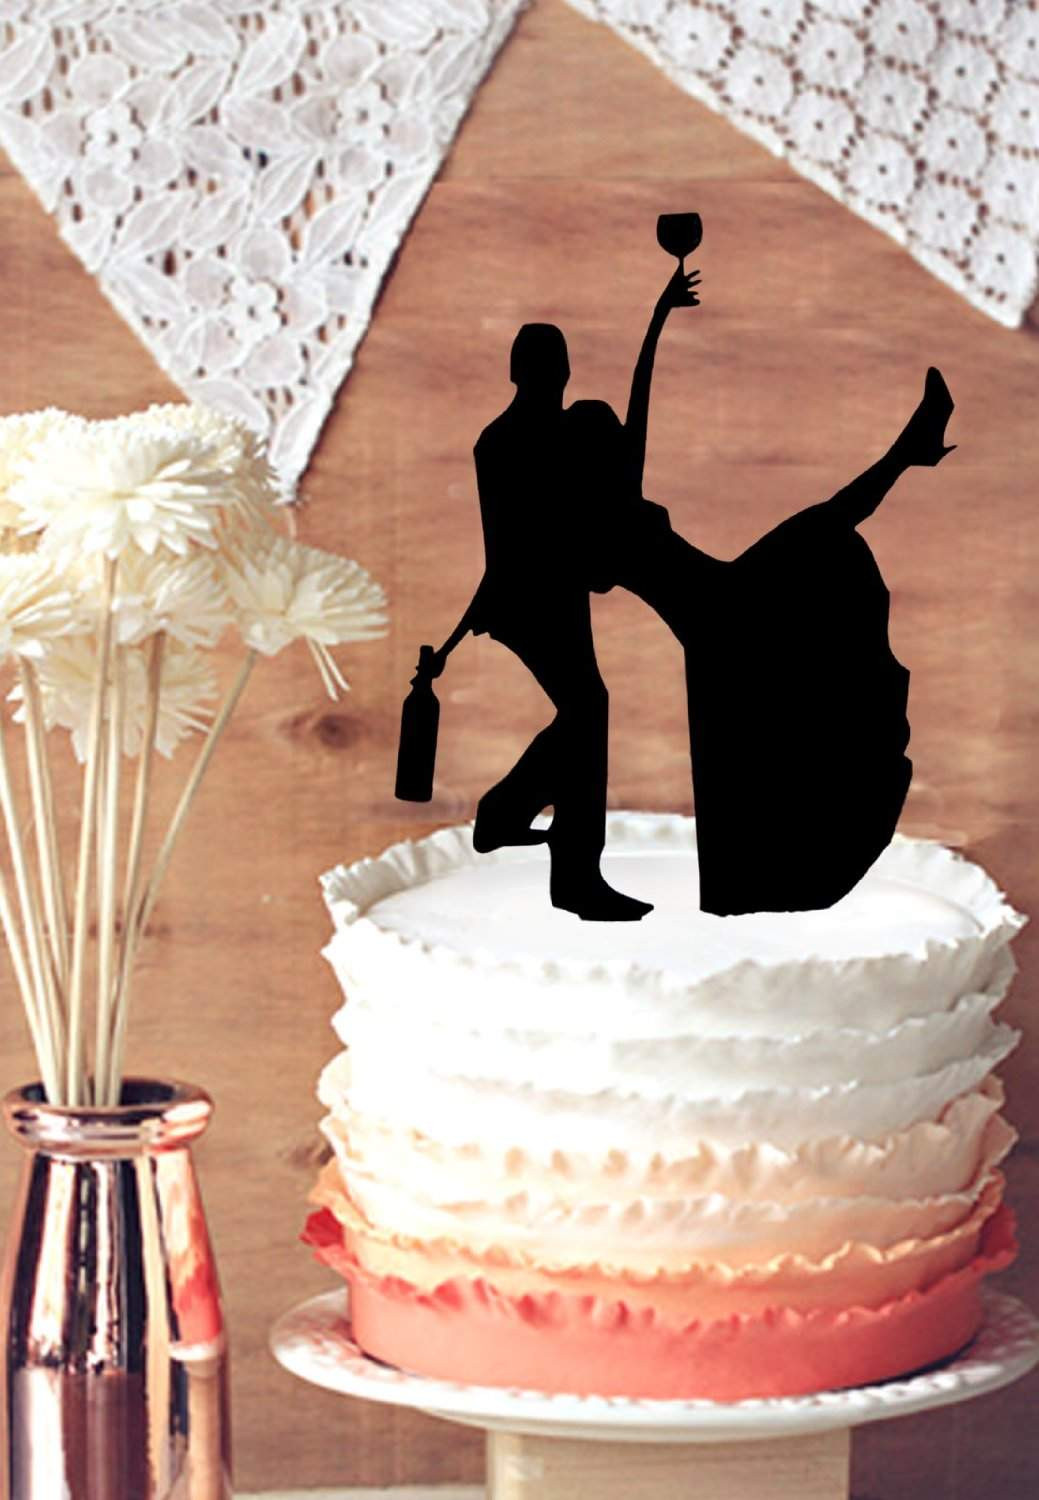 Cake Toppers Wedding
 11 Funny Wedding Toppers for Your Cake 2018